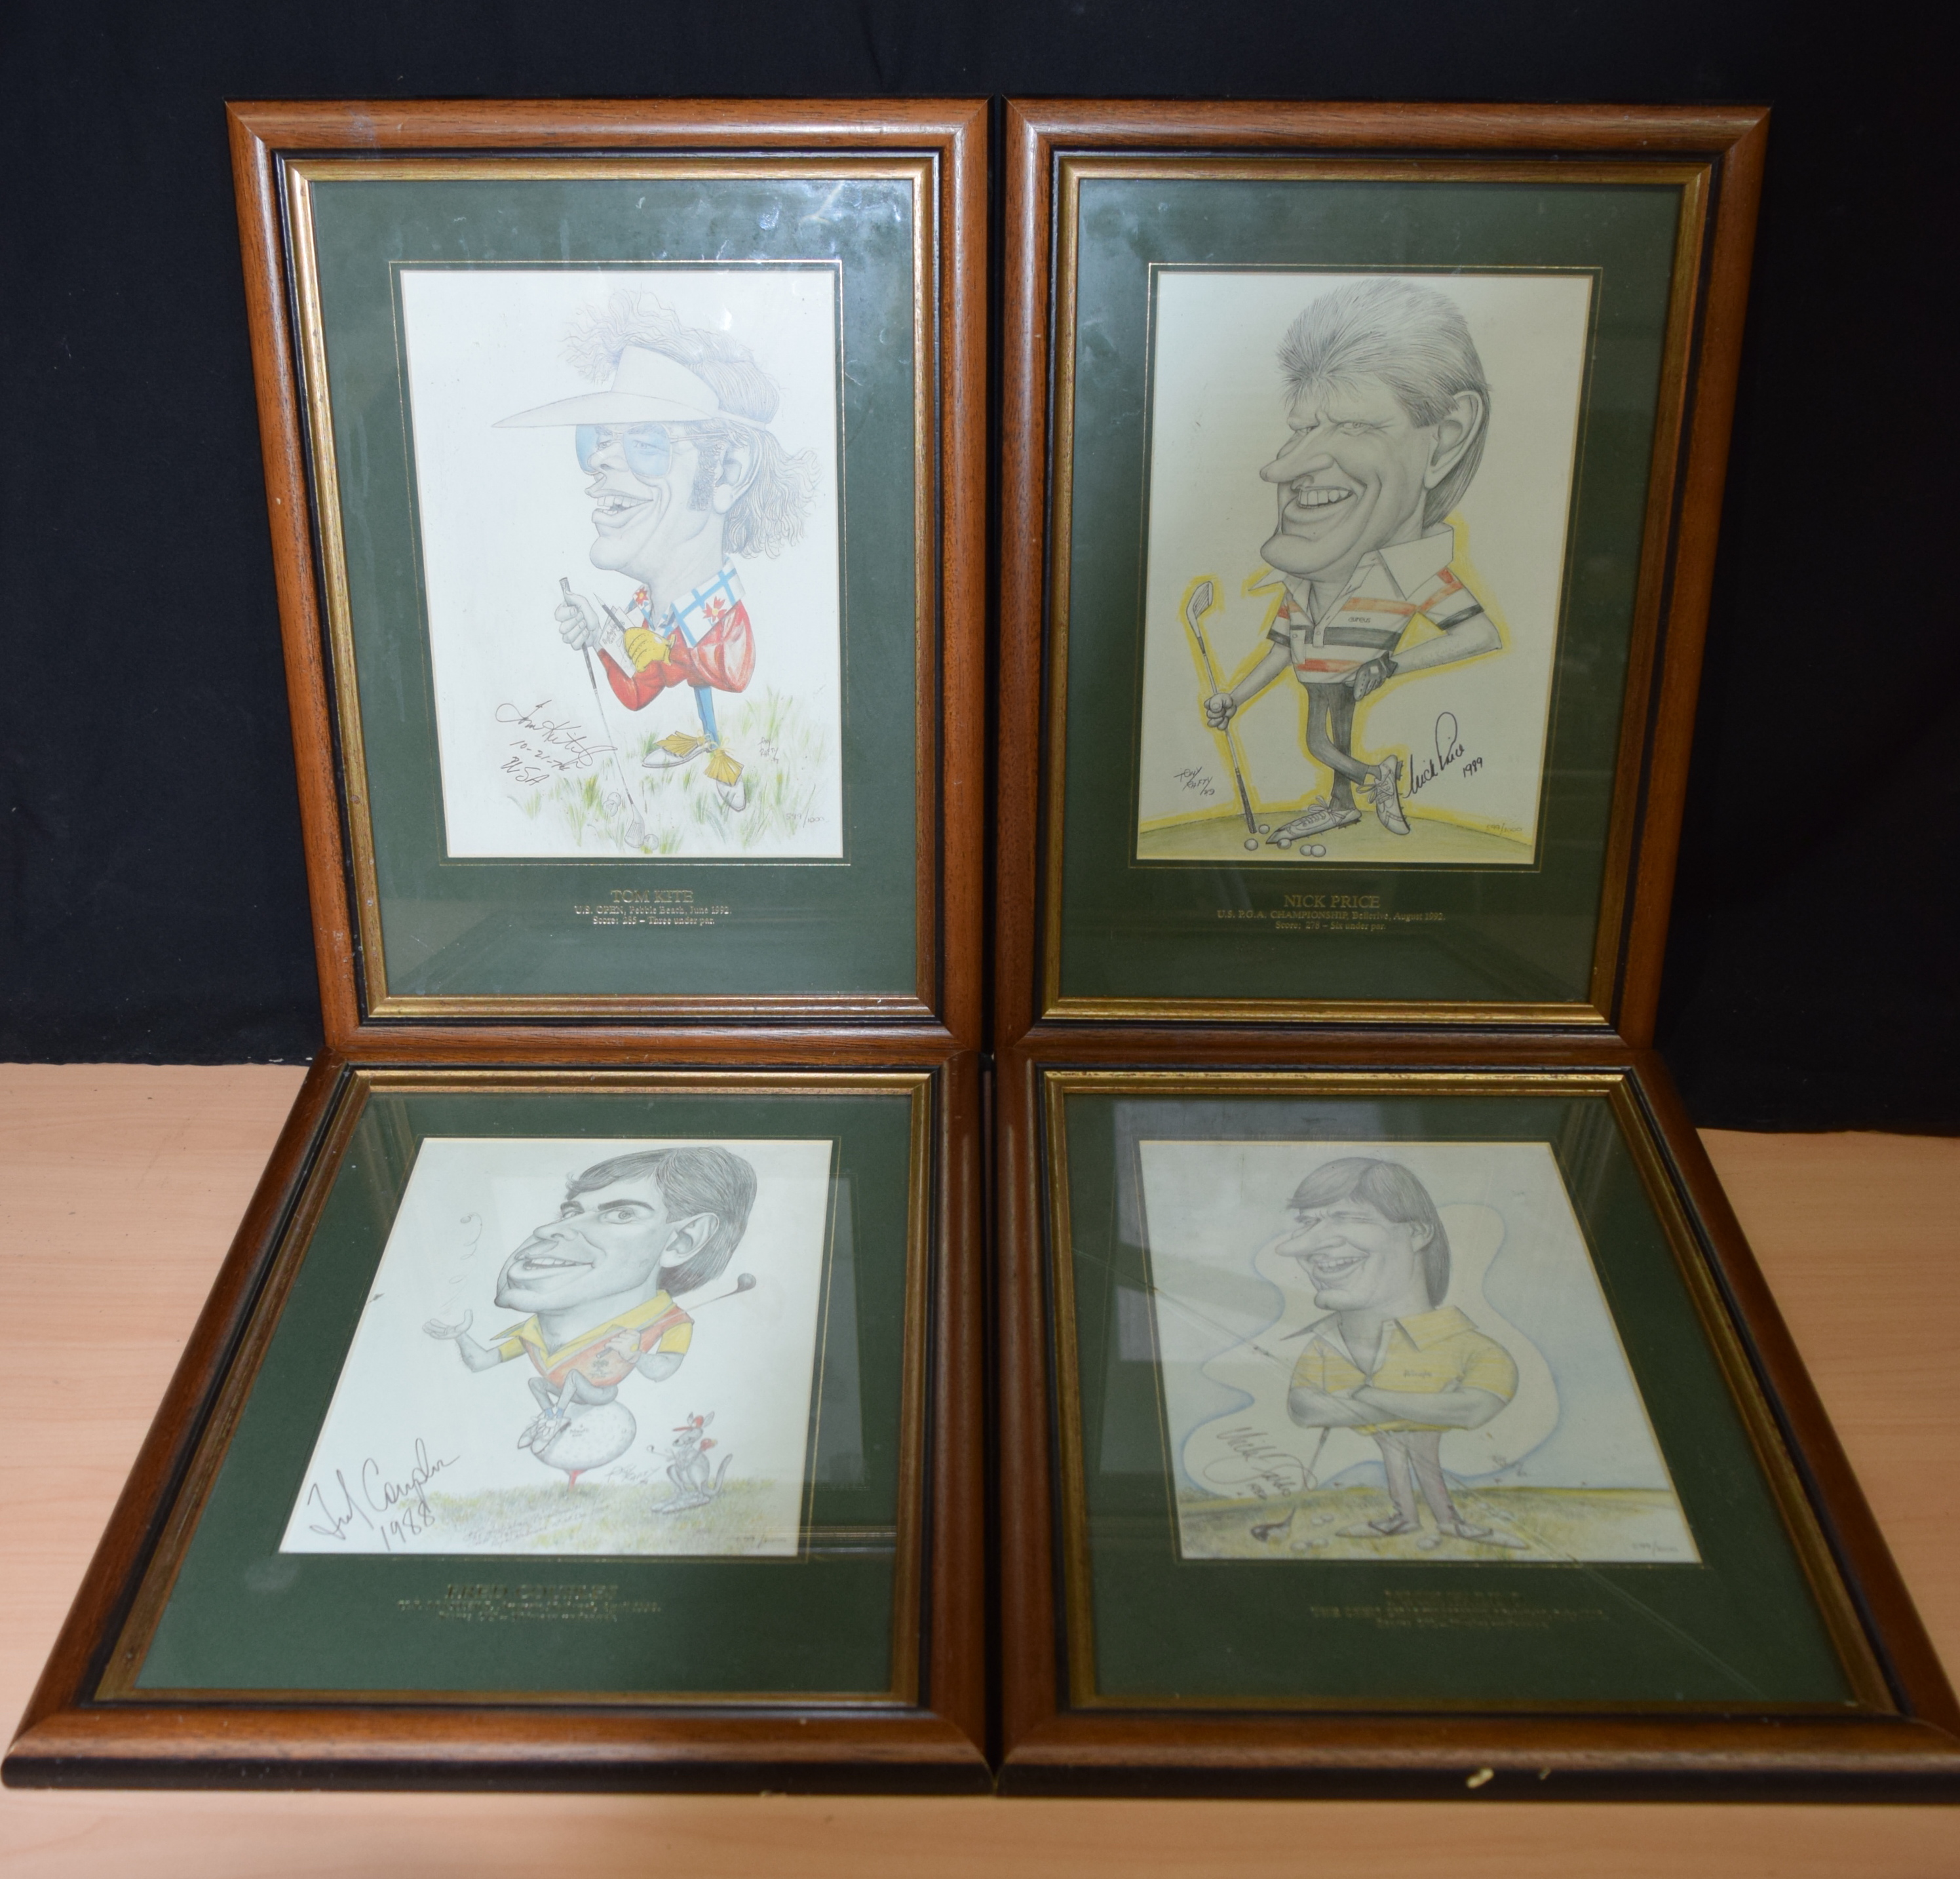 Group of 4 limited edition autographed prints of Golfers by Tony Rafty 29 x 20cm (4) .